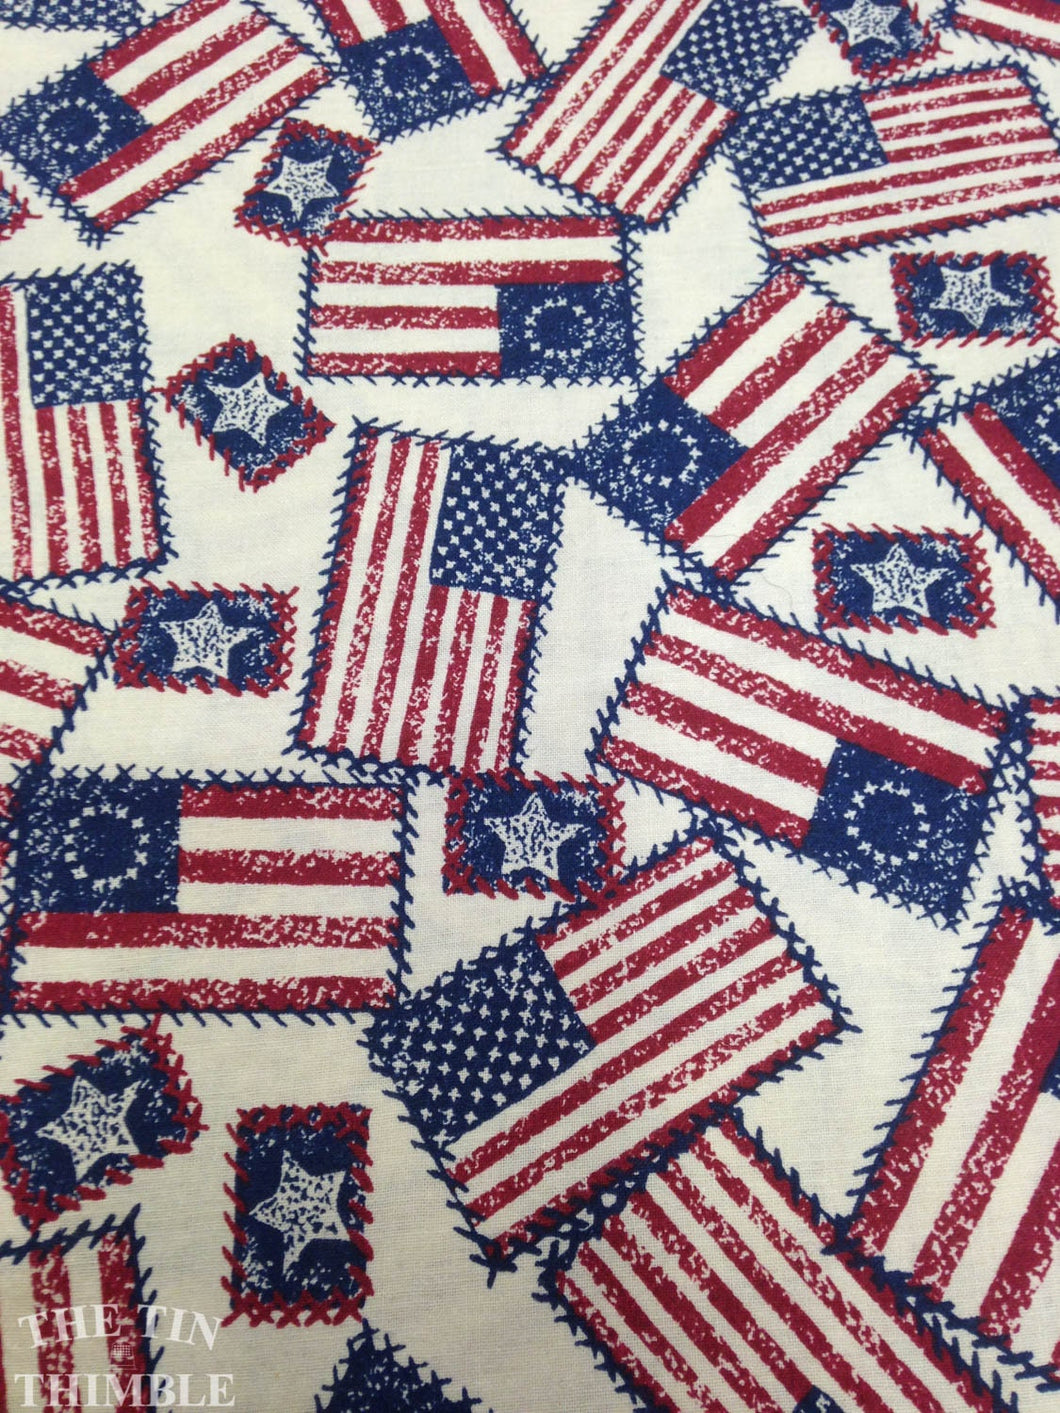 Patriotic Print - 1 yard / Cotton / Flag Fabric / Stars and Stripes / Signature Classics / Oakhurst Textiles / Red White and Blue / Quilting